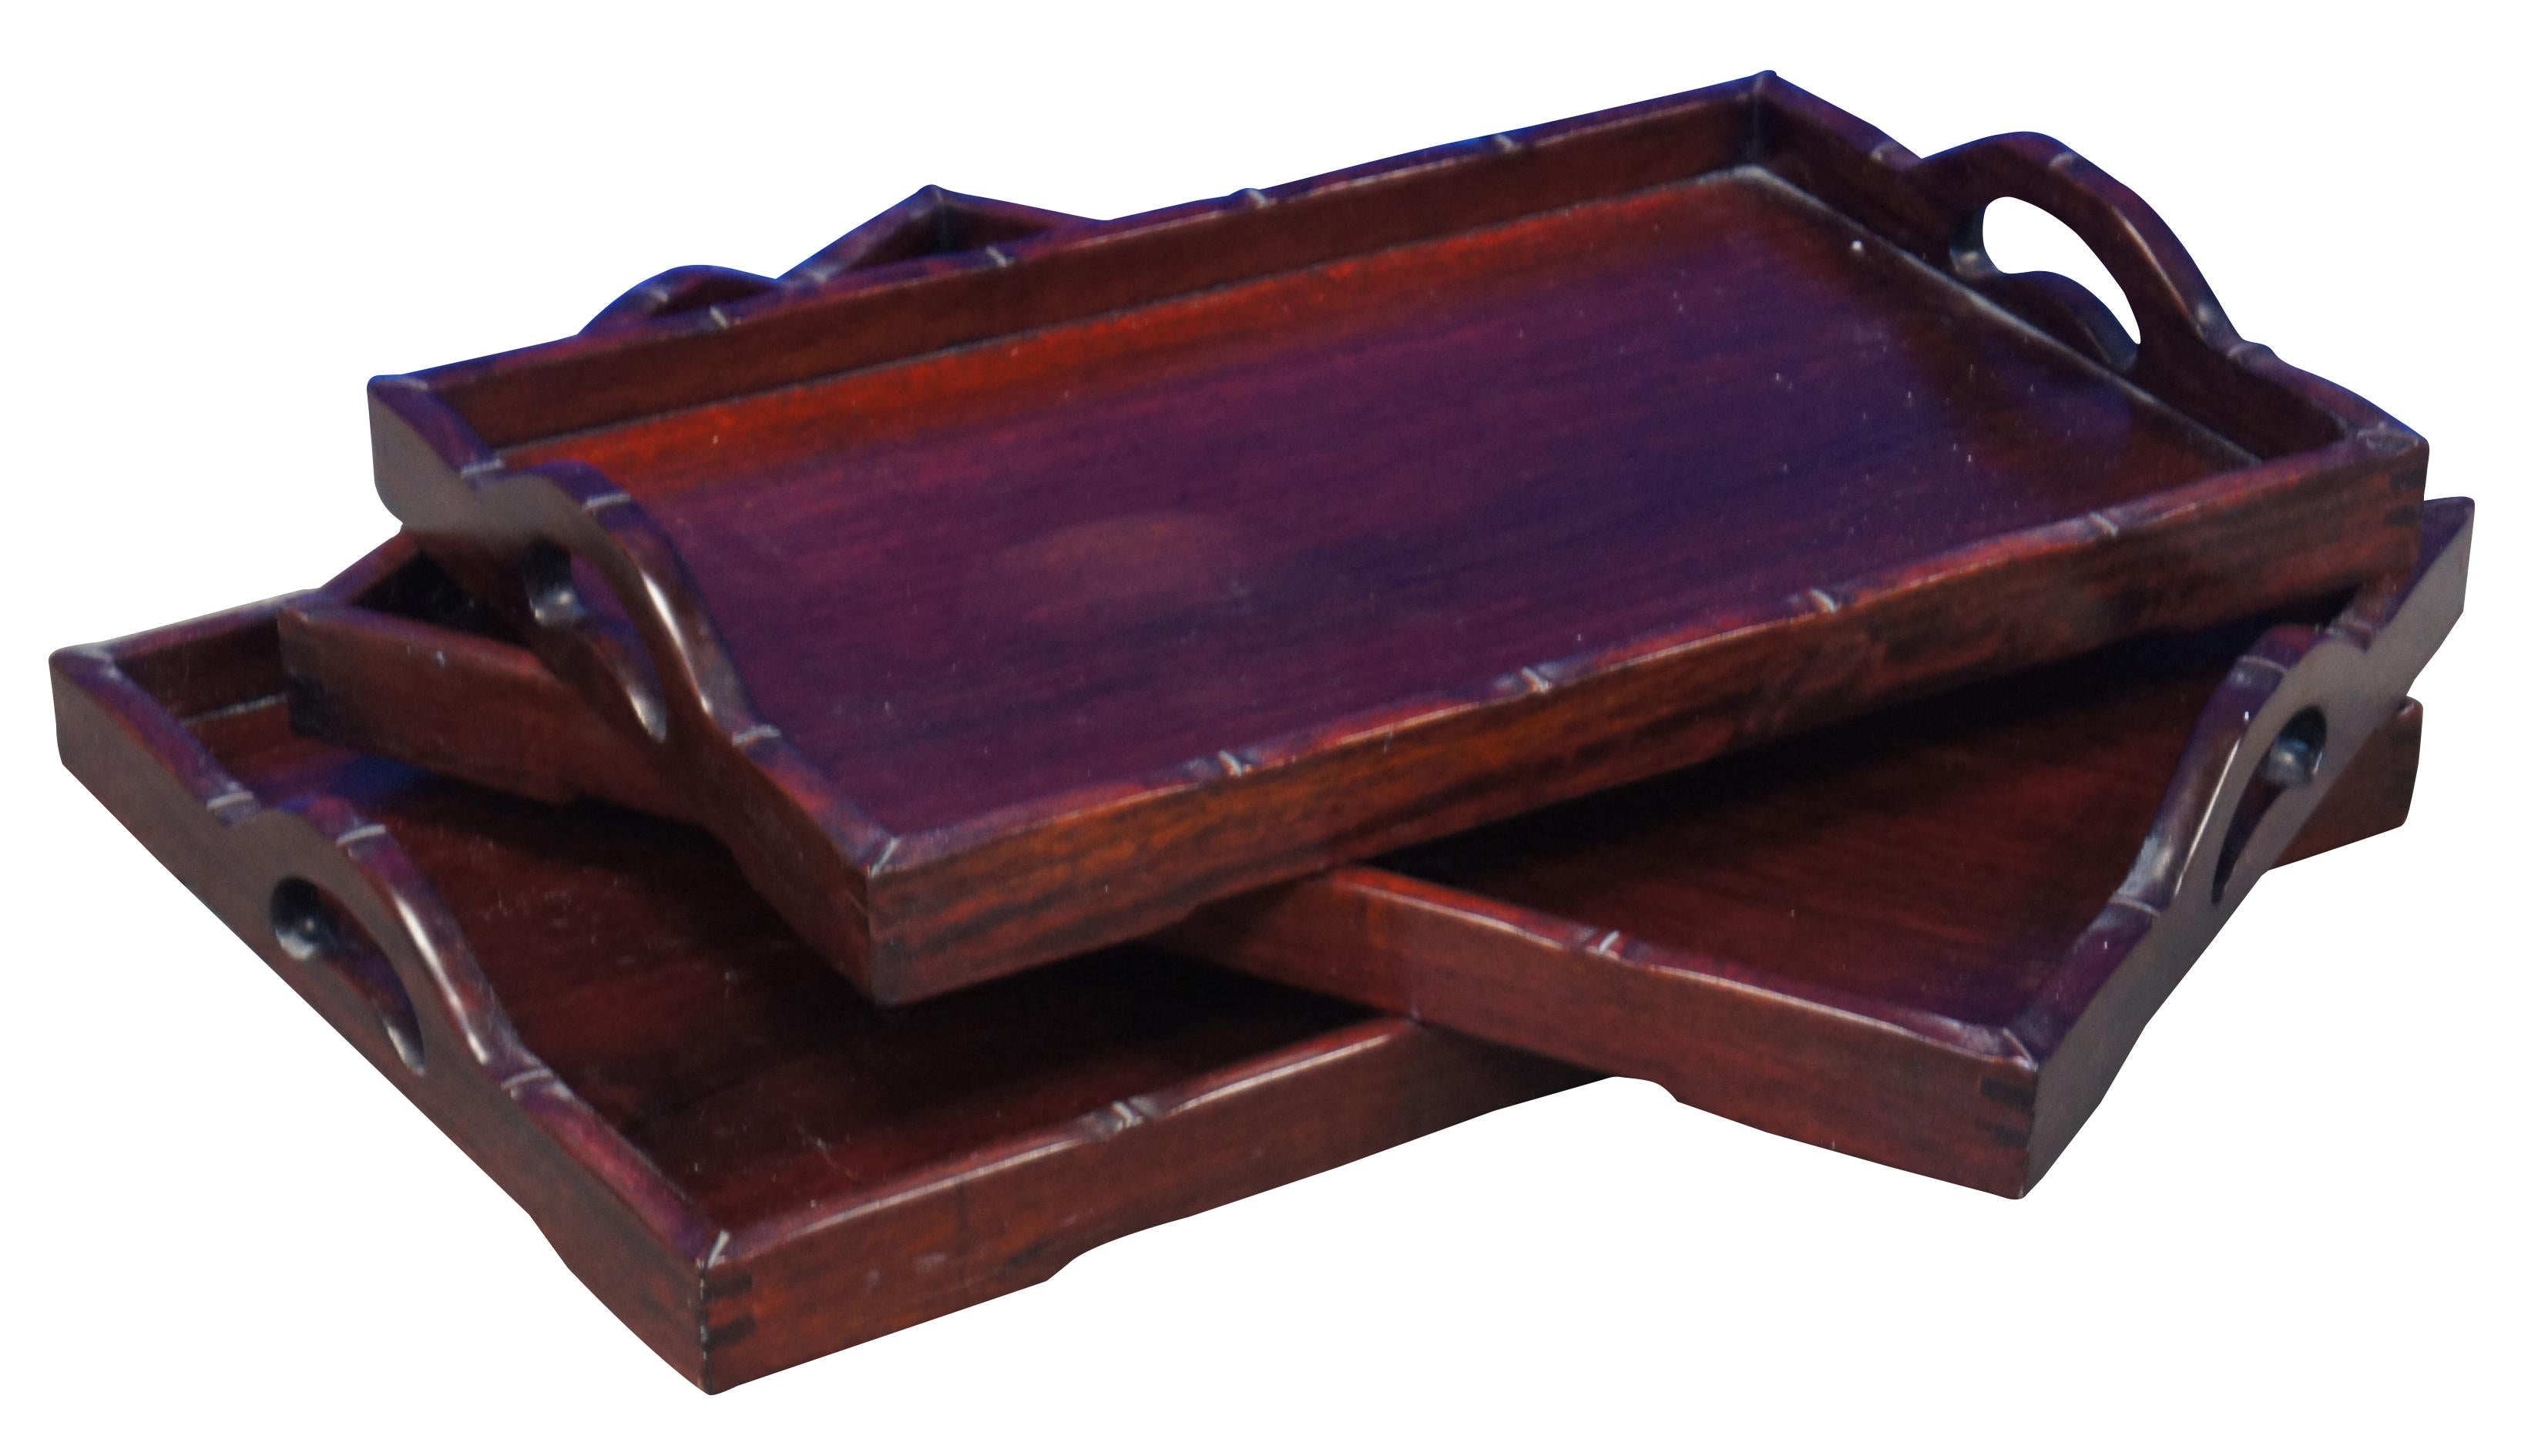 Set of three mid-century rosewood nesting serving bar or tea trays with arched handles and faux bamboo style edge.

Largest - 20” x 14” x 2.25” / smallest - 17.5” x 11.5” x 2.25” (width x depth x height).